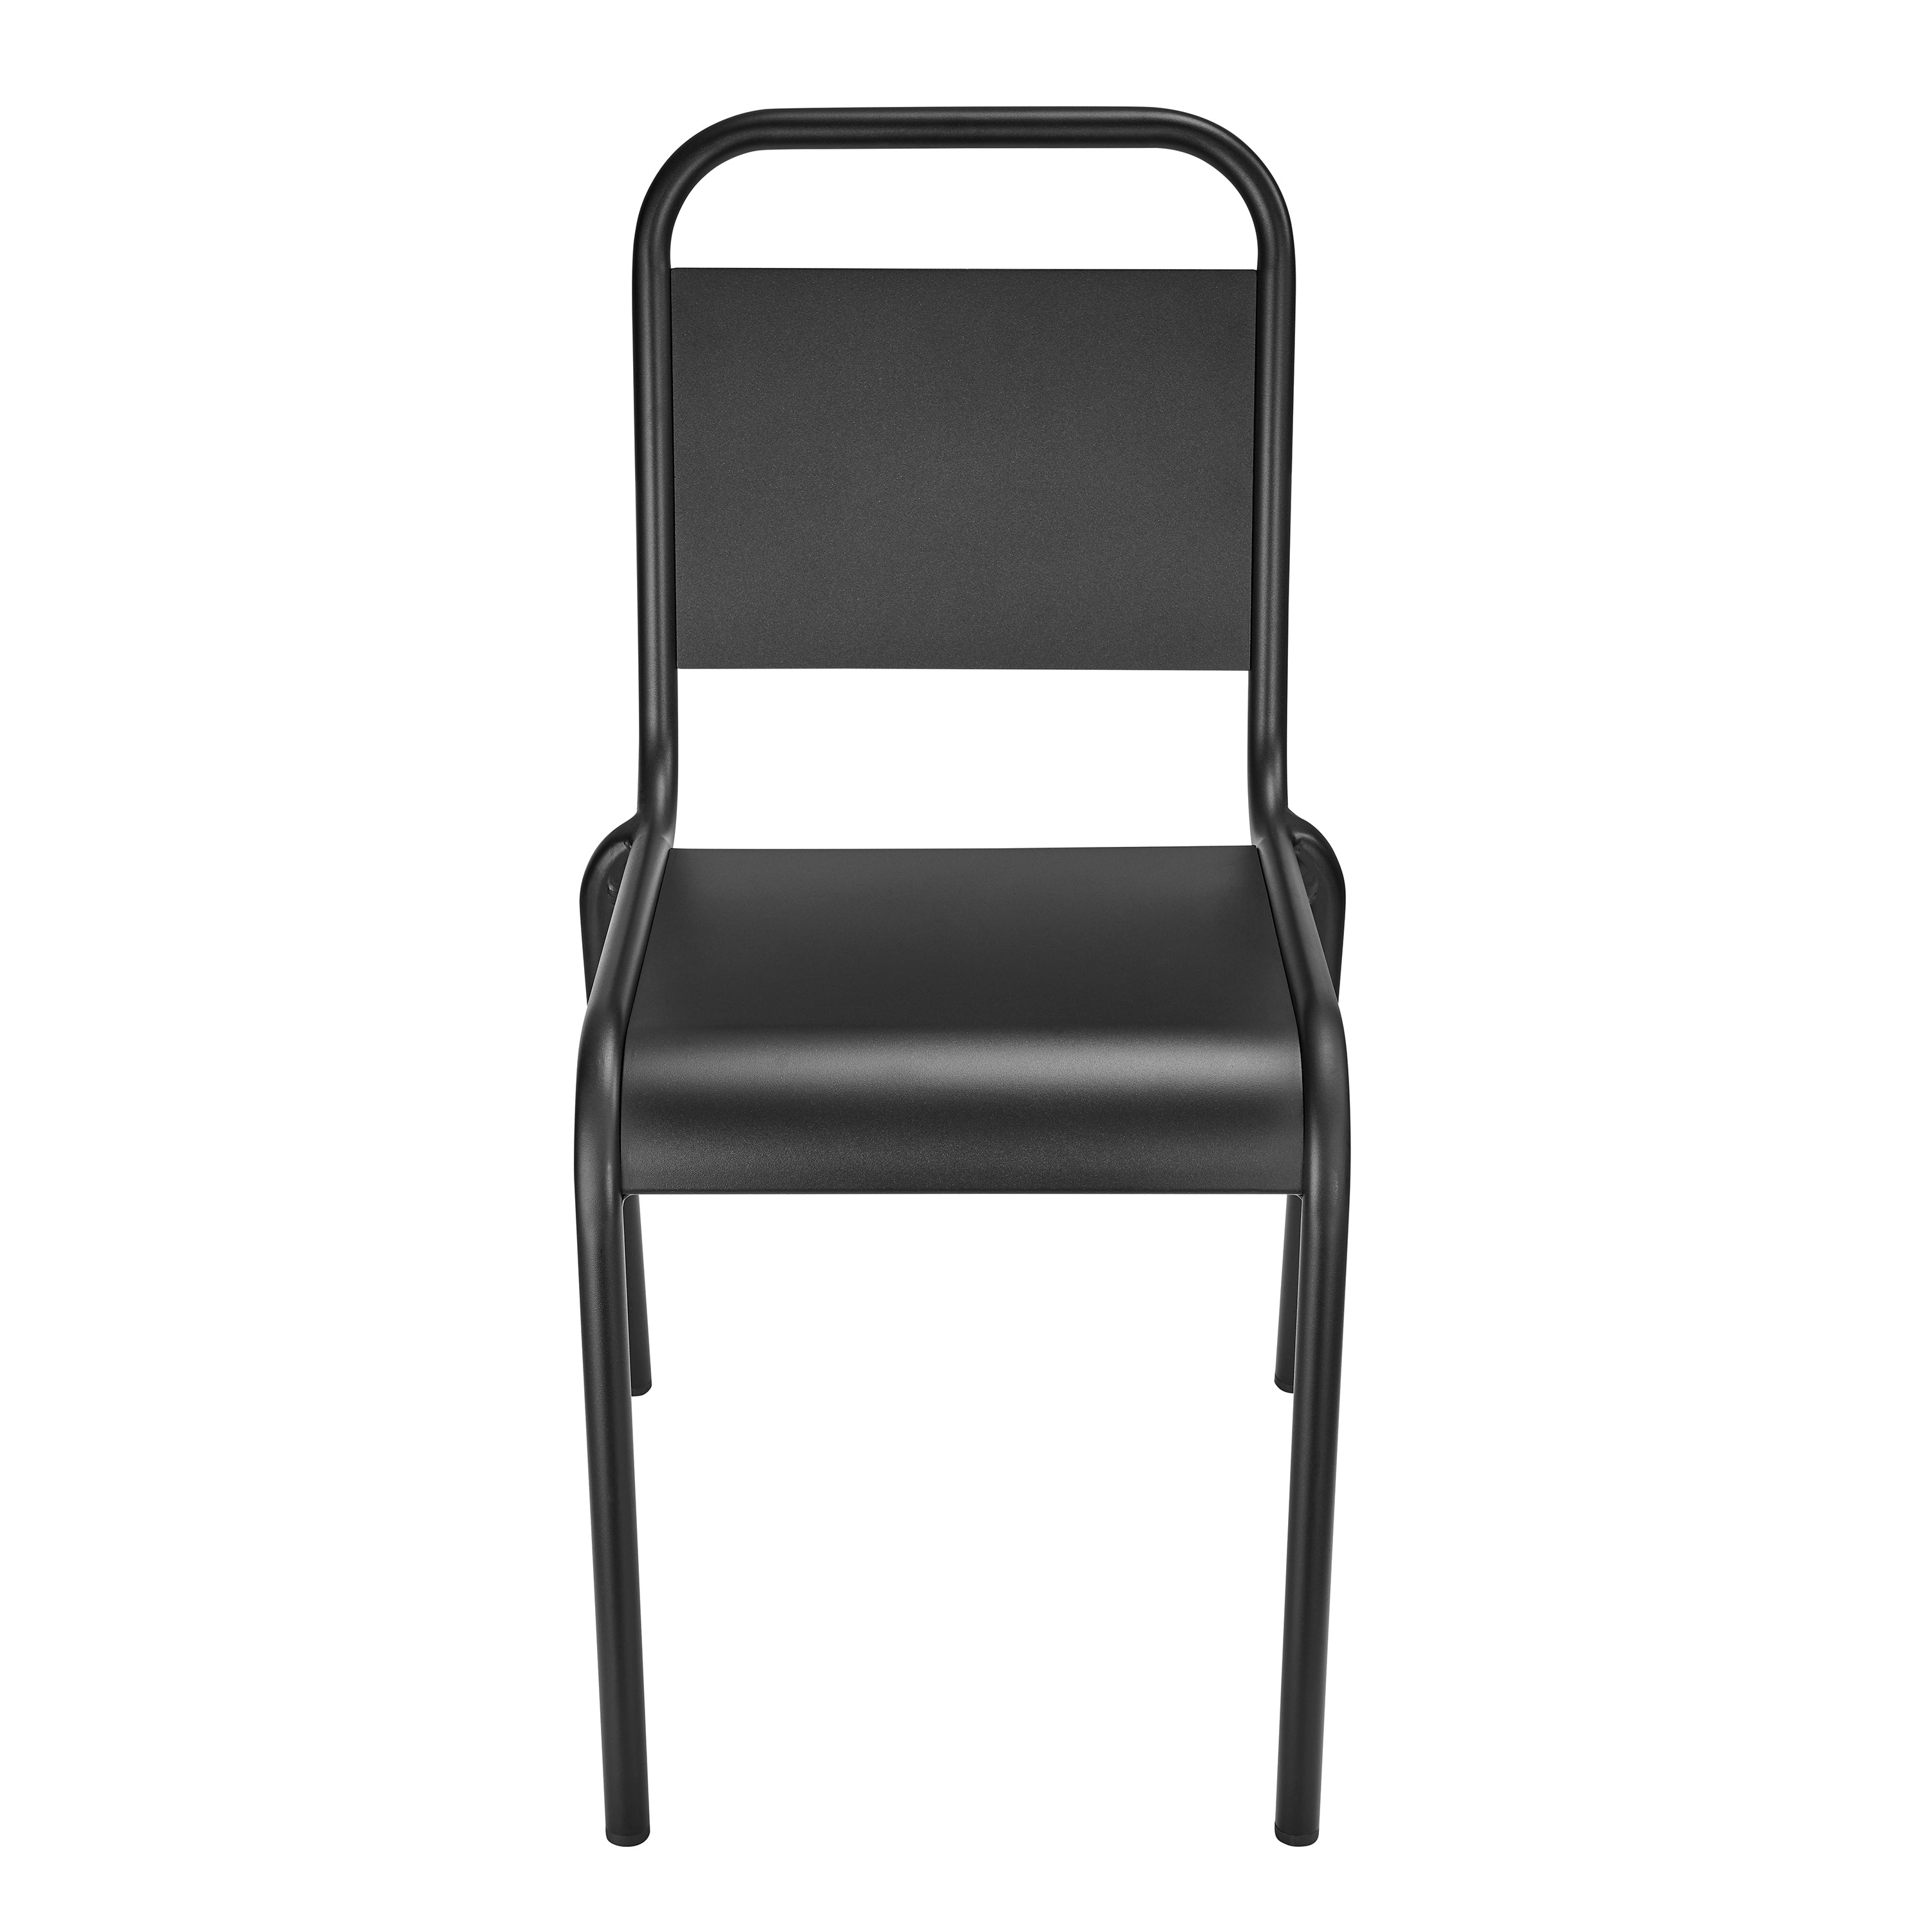 Euro Style Dining Chairs - Otis Outdoor Side Chair in Black - Set of 2